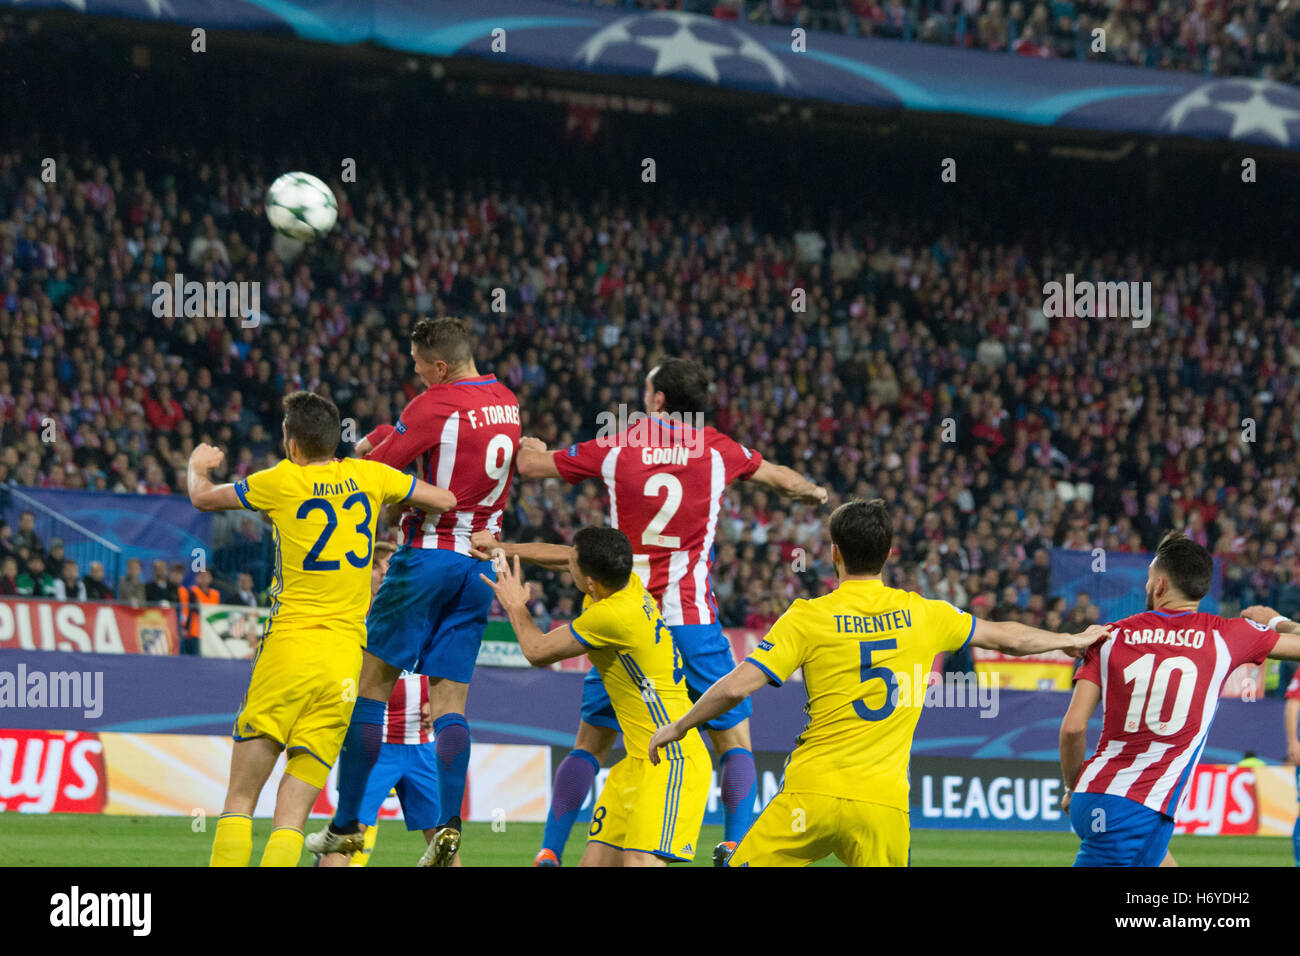 Madrid, Spain. 01st Nov, 2016. Torres (C) hit the ball. Atletico de Madrid wons by 2 to1 whit two goals of Griezman. © Jorge Gonzalez/Pacific Press/Alamy Live News Stock Photo